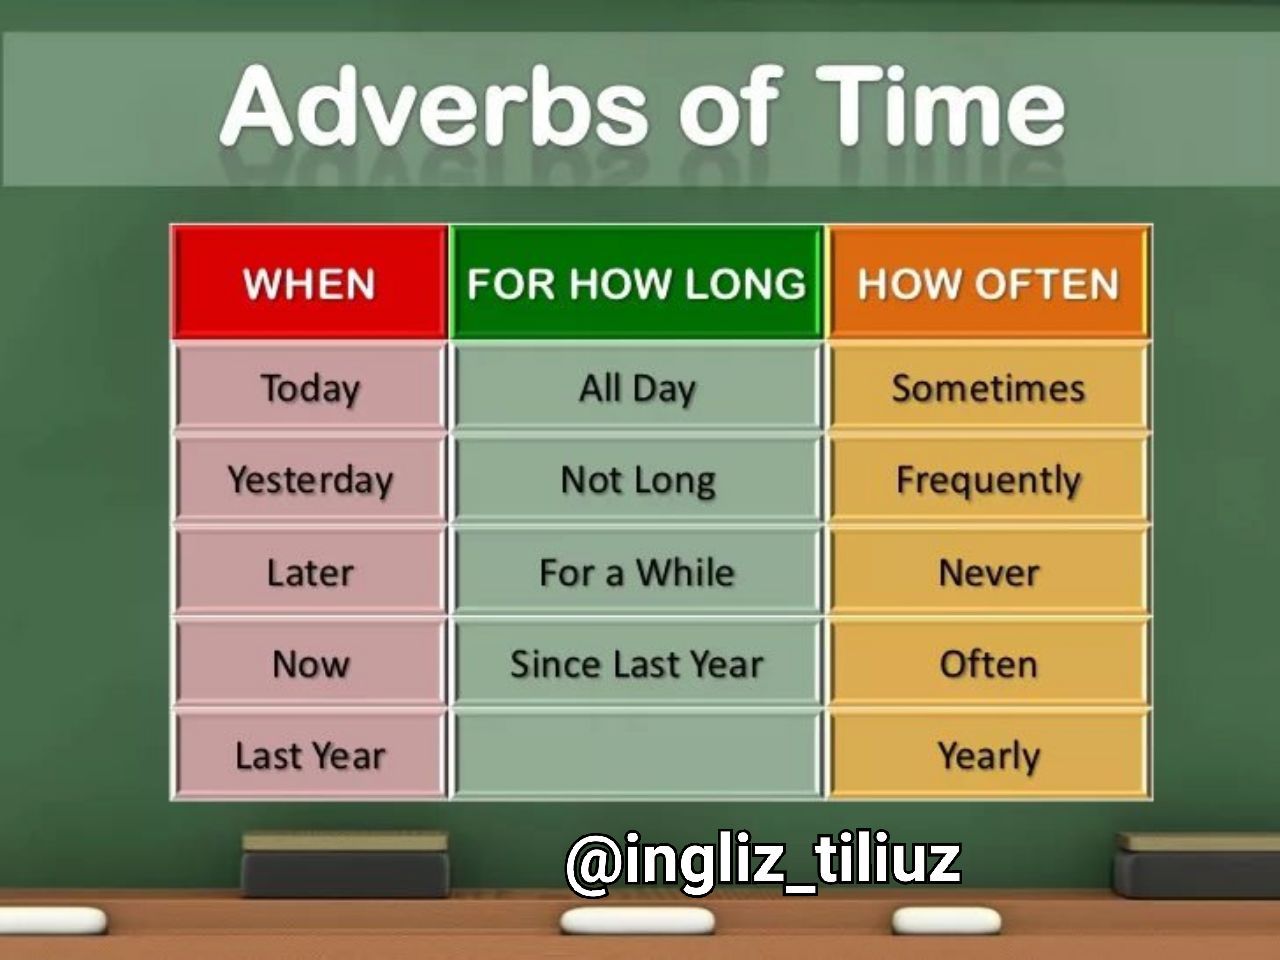 Adverbs games. Adverbs of time. Adverbial of time. Adverbs of Focus. Adverbs of time and place таблица.